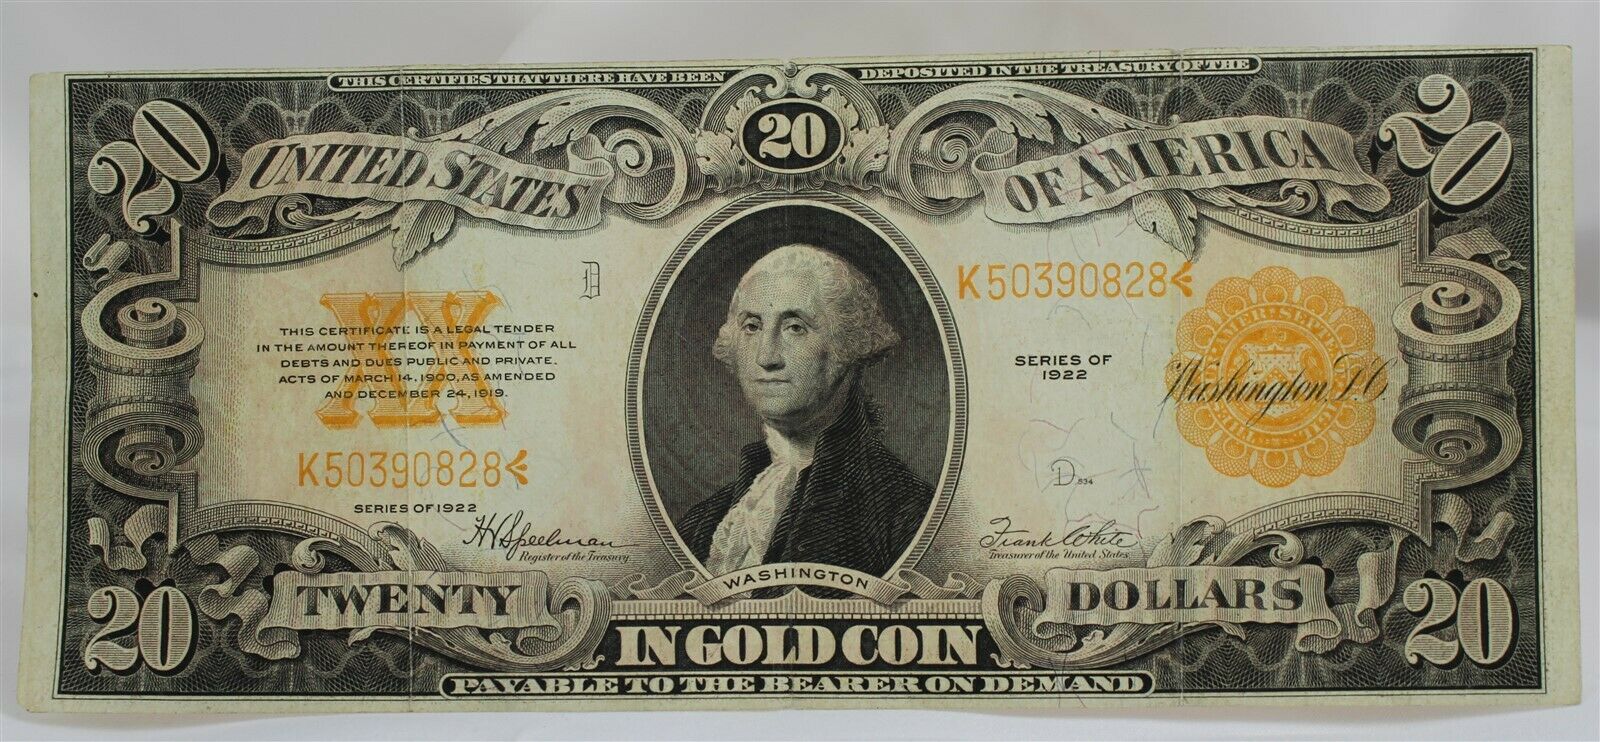 US $20 Gold Certificate Series 1922 Large Bill